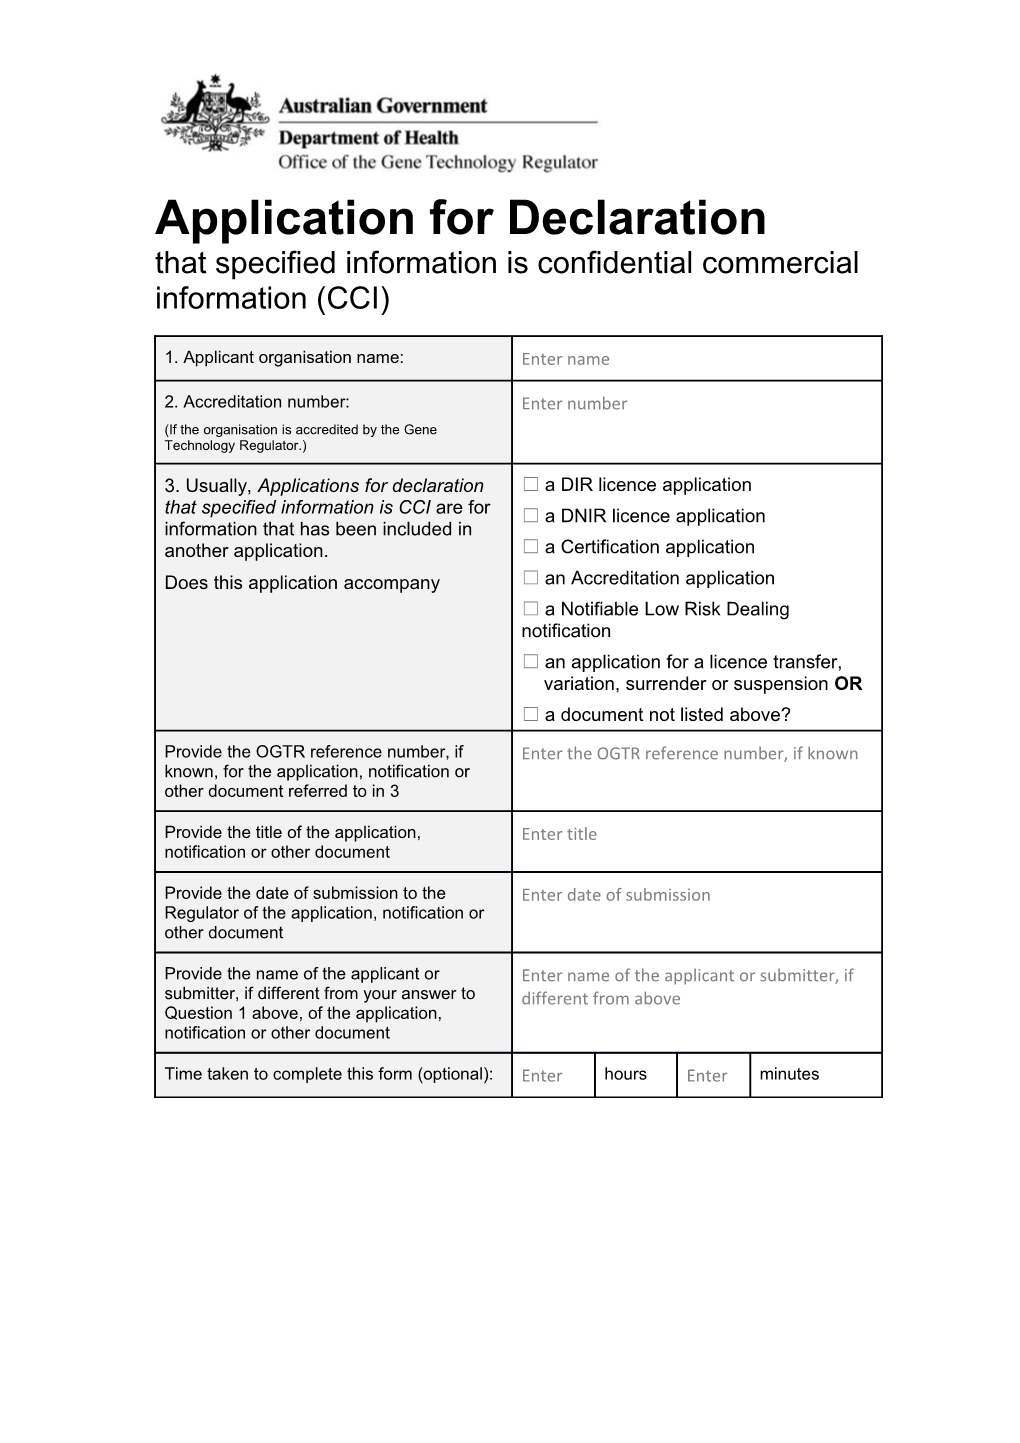 Application for Declaration That Specified Information Is CCI